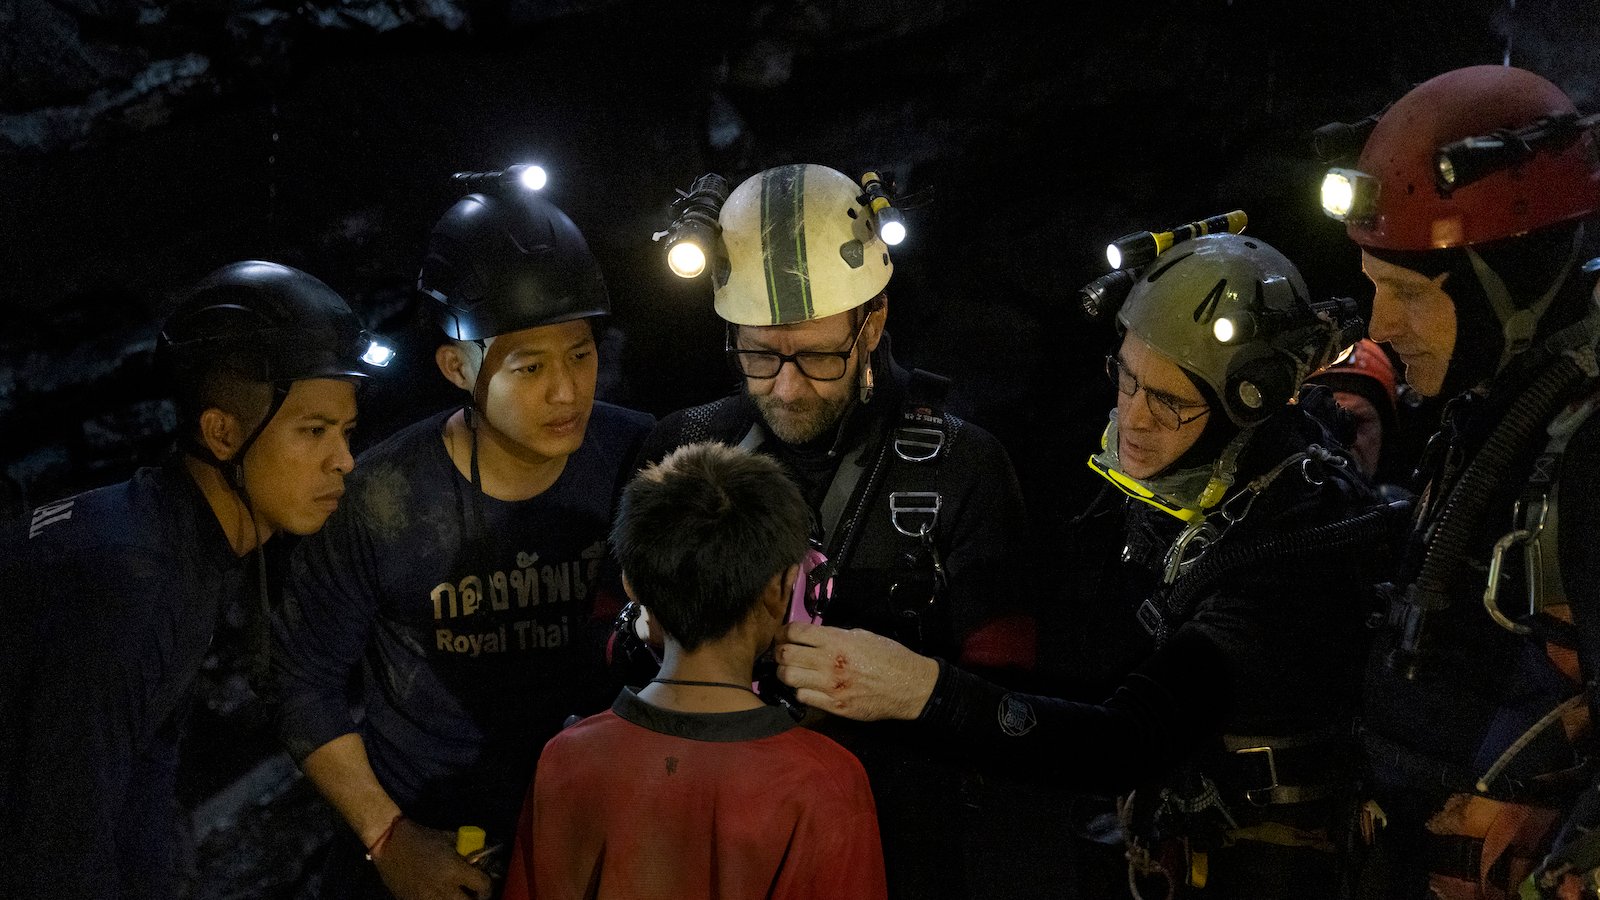 In a cave, a group of divers in helmets stand around a boy, seen from the back, in a red shirt.